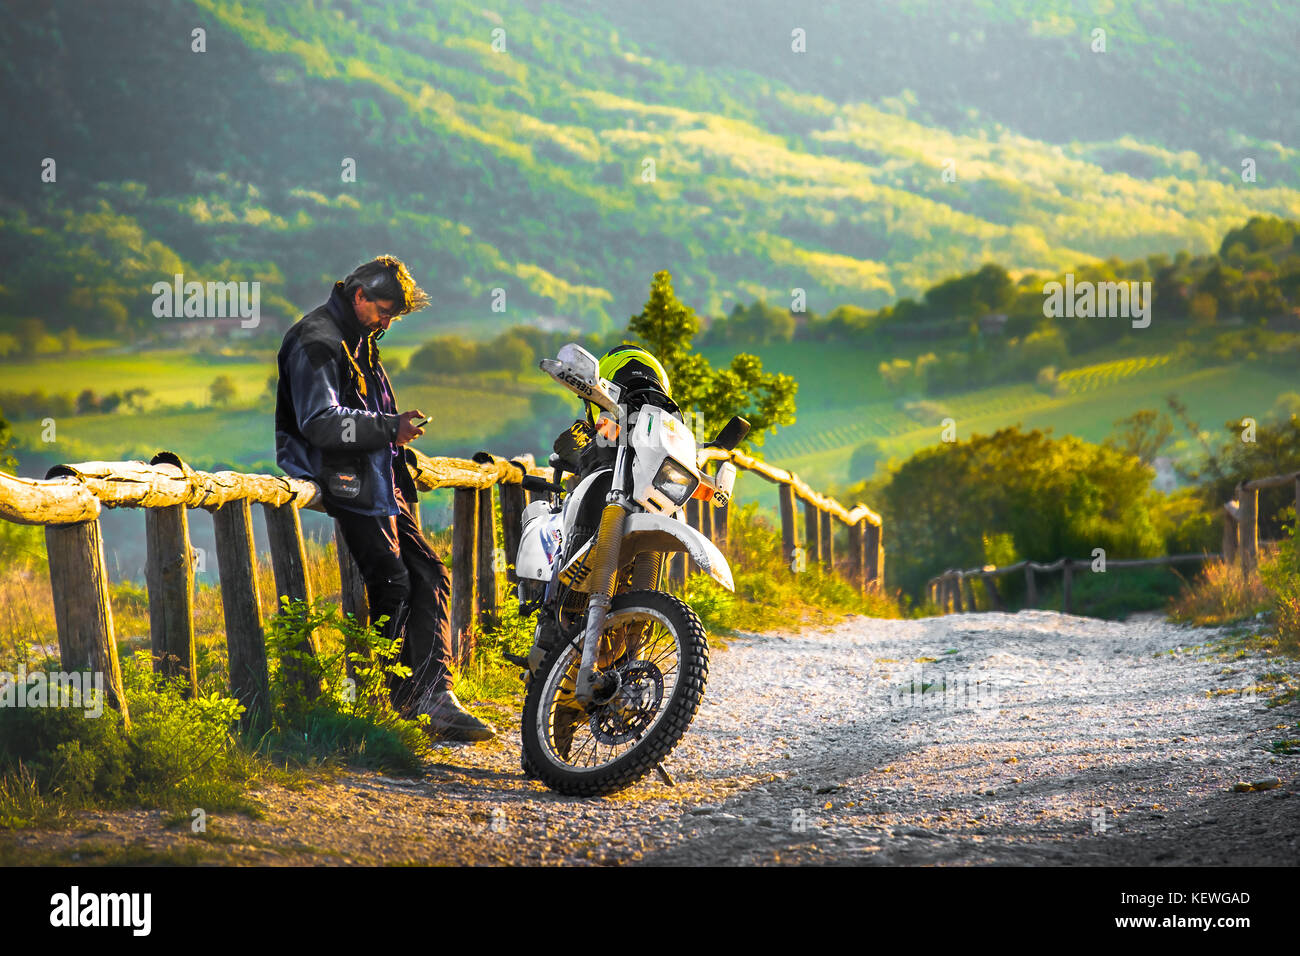 on a off road motocross track a biker rest at the sunset on a wooden fence in the Colli Euganei, Italy, 22 Apr 2017 Stock Photo